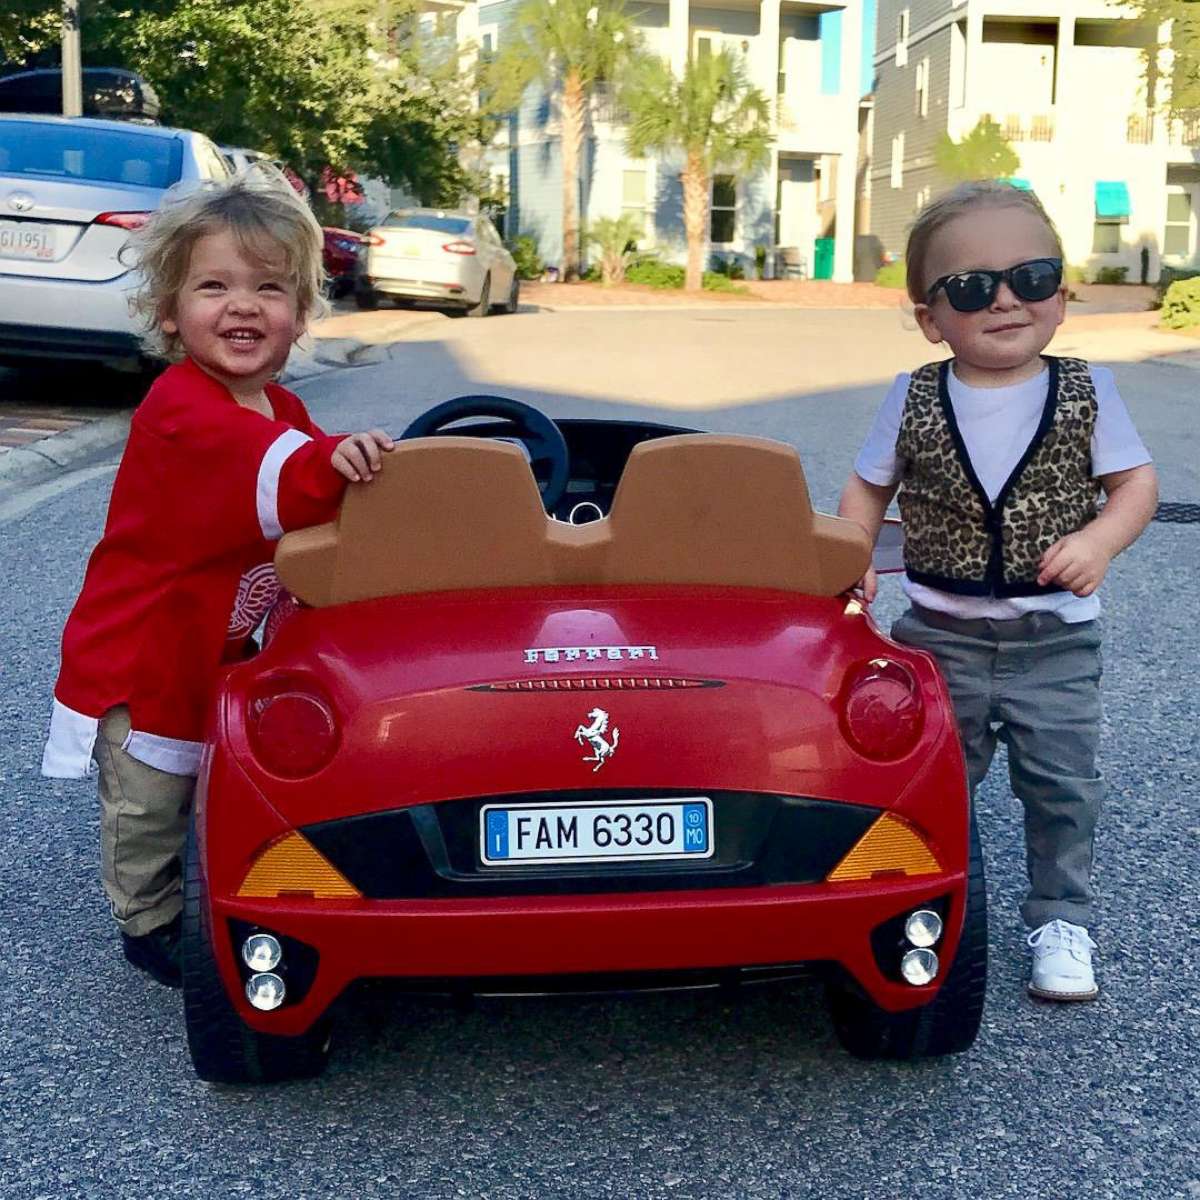 PHOTO: Lauren Willis is dressing her twins as movie characters Ferris Bueller and Cameron Frye for Halloween, complete with a red Ferrari.